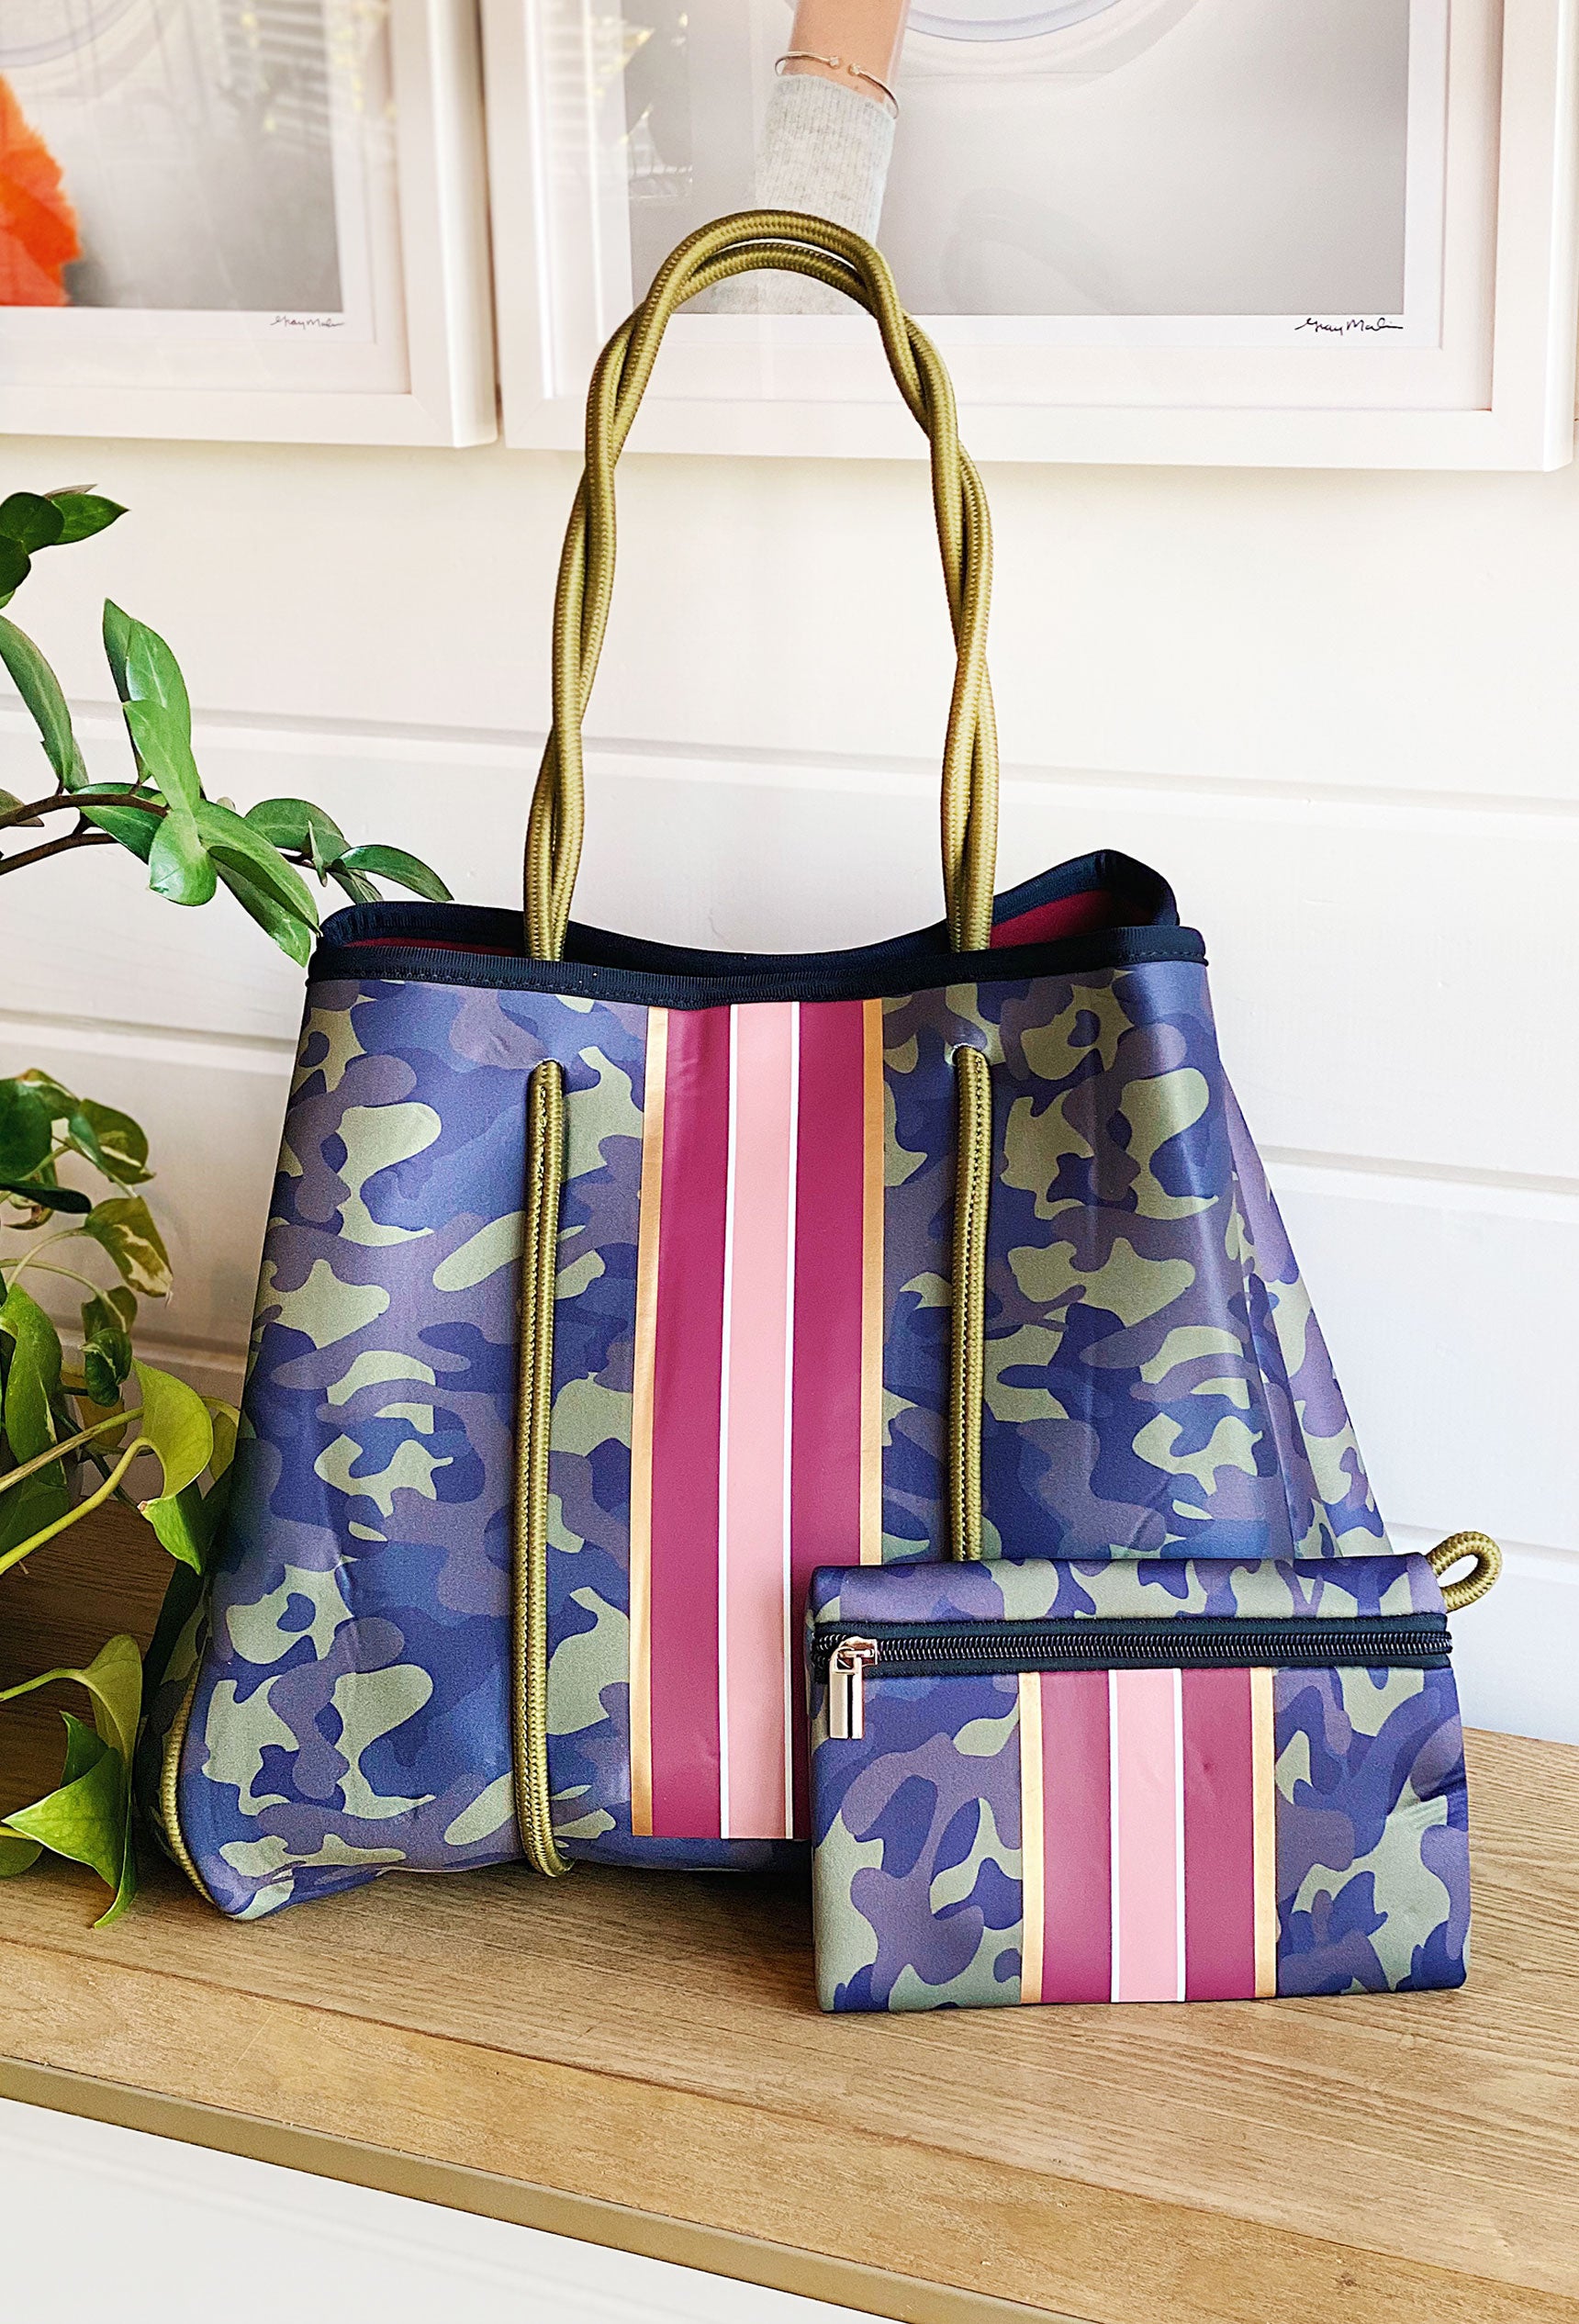 The Carroll Neoprene Tote, Taylor Gray camo tote with stripes 